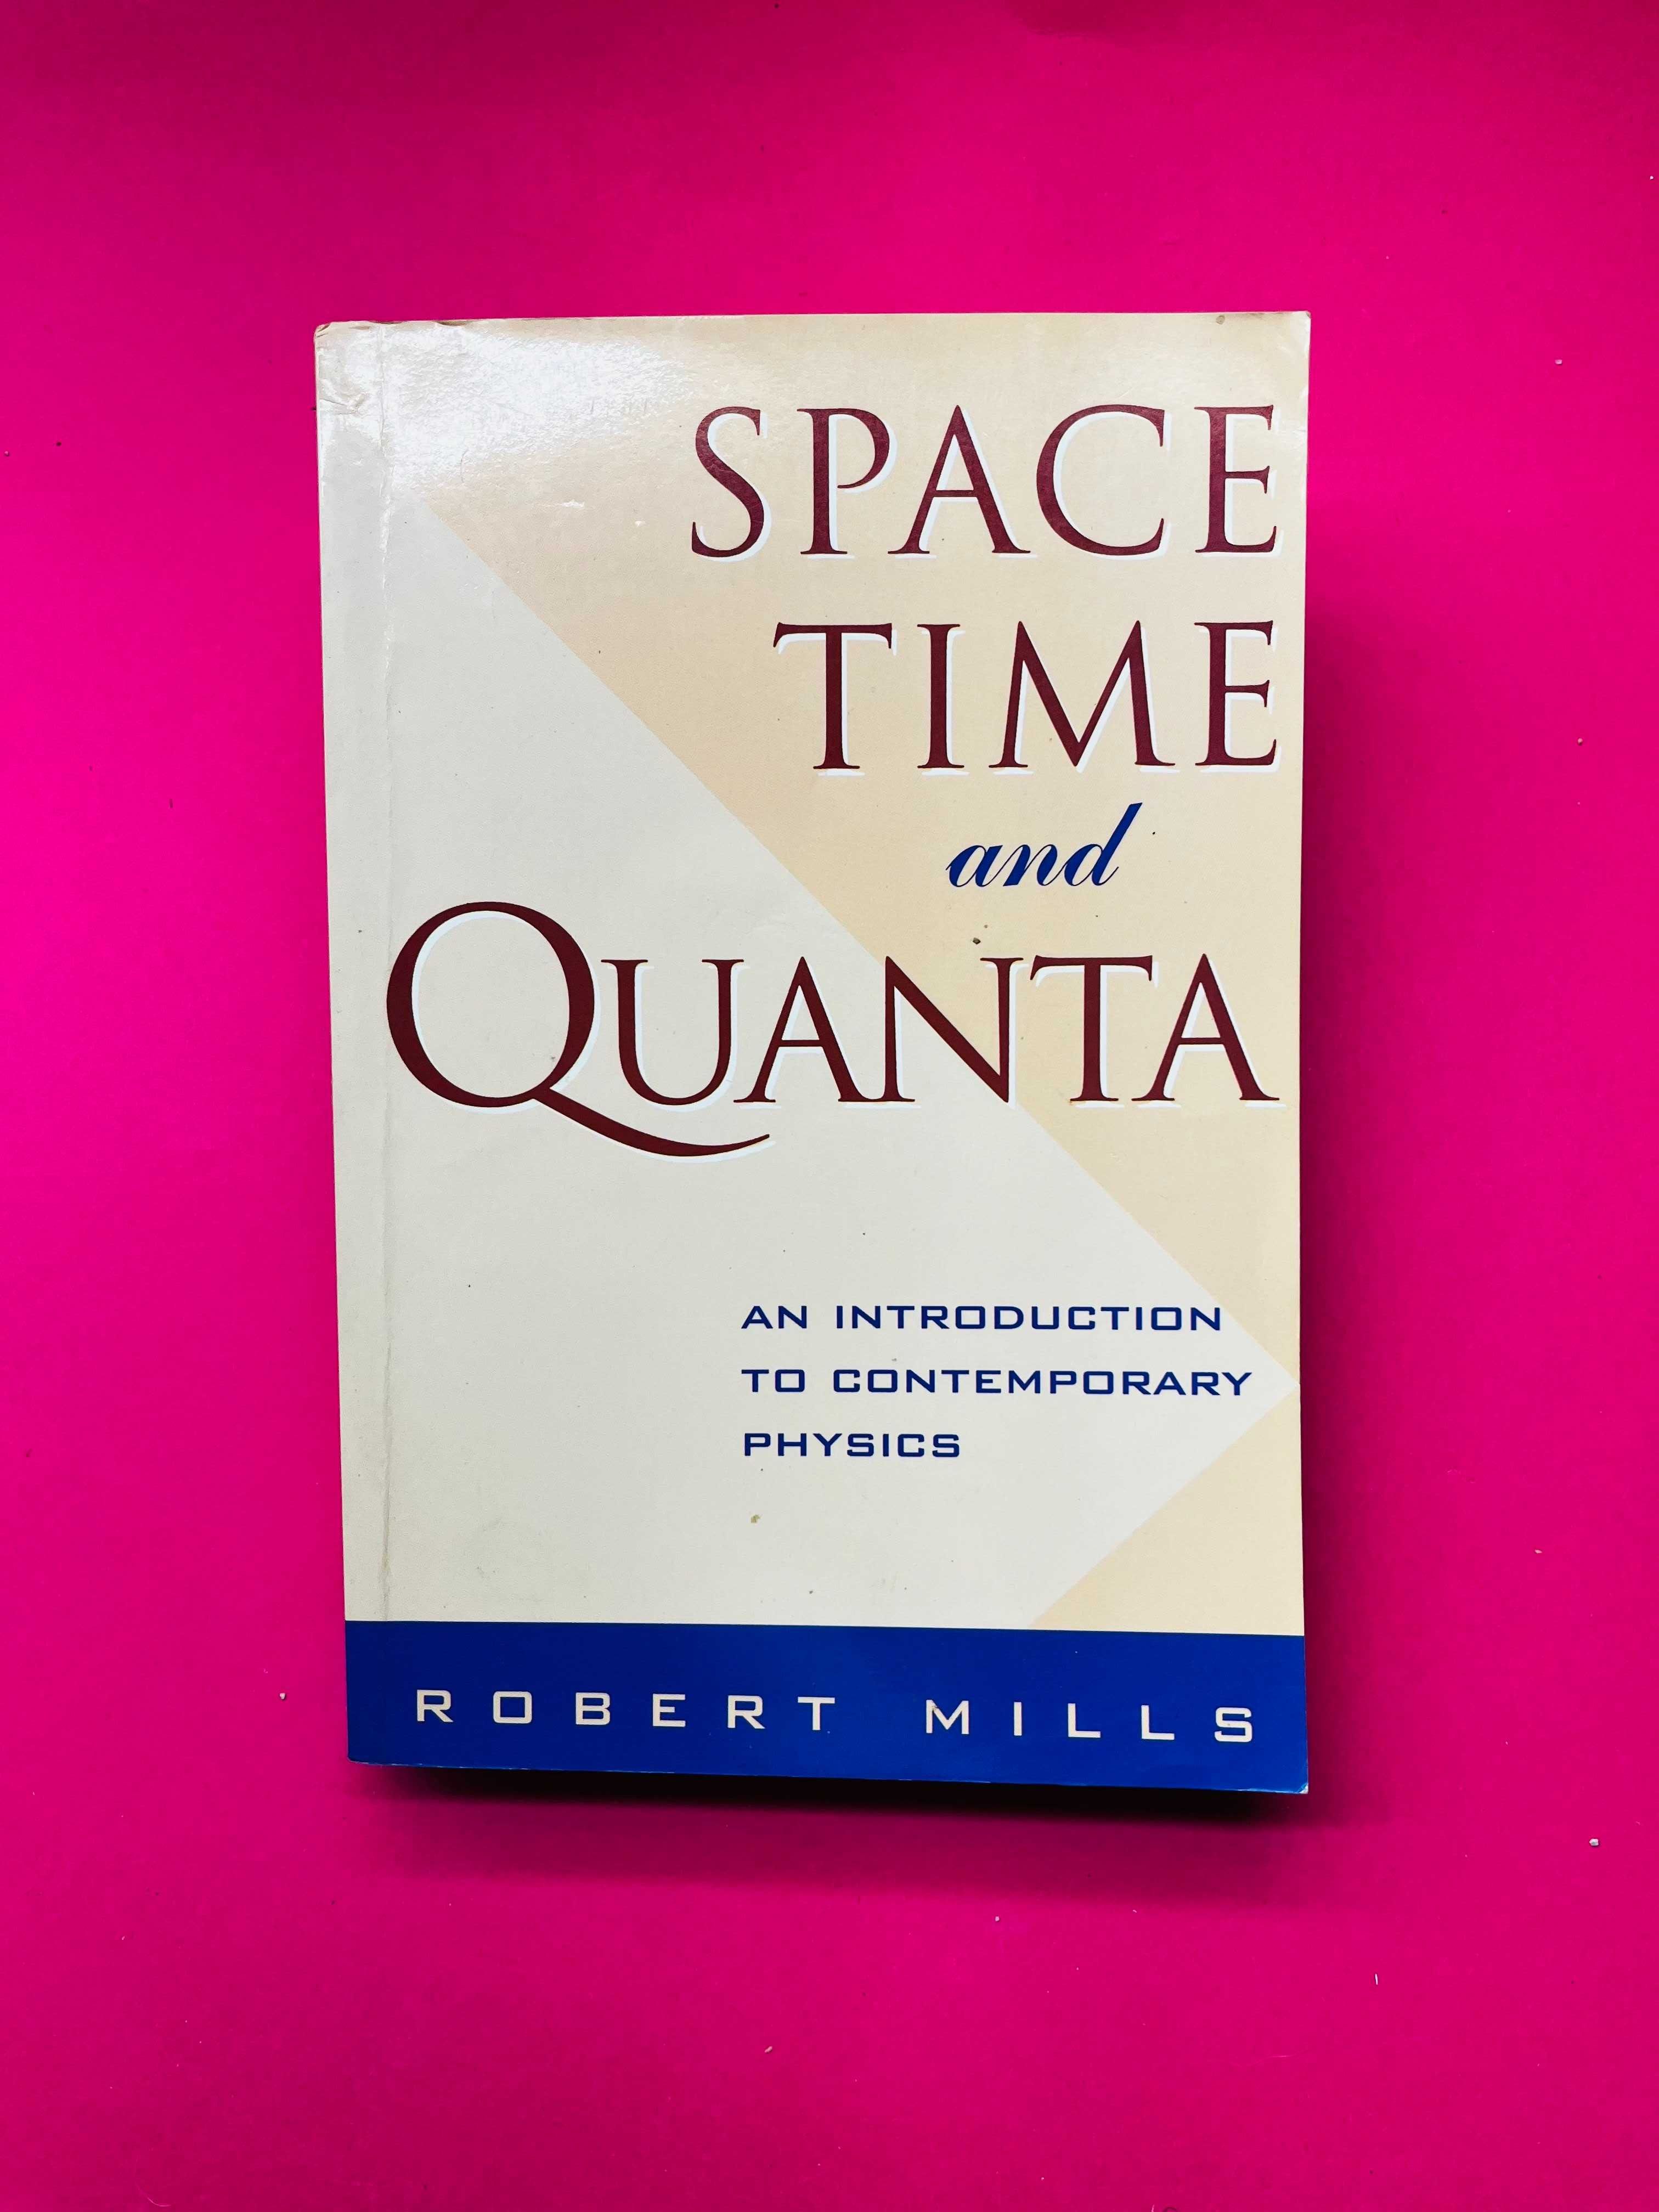 Space Time and Quanta - Rober Mills